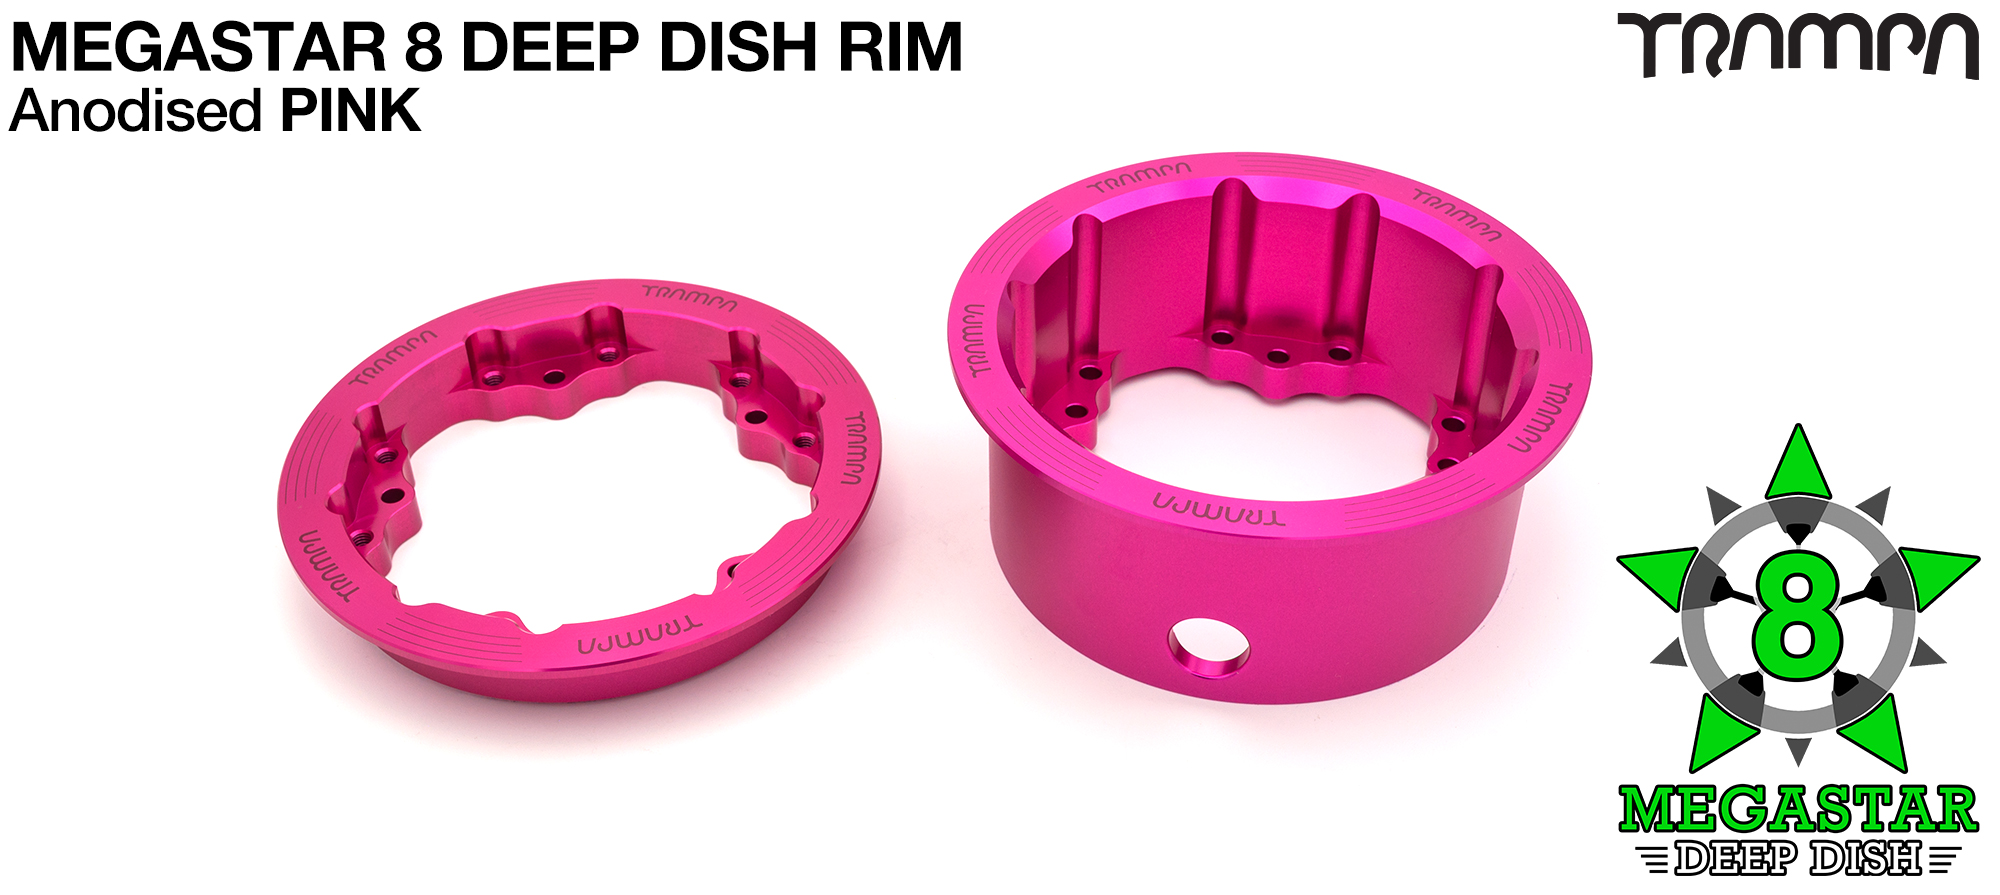 MEGASTAR 8 DEEP-DISH Rims Measure 3.75 x 2.5 Inch. The bearings are positioned OFF-SET widening the wheel base & accept all 3.75 Rim Tyres - PINK